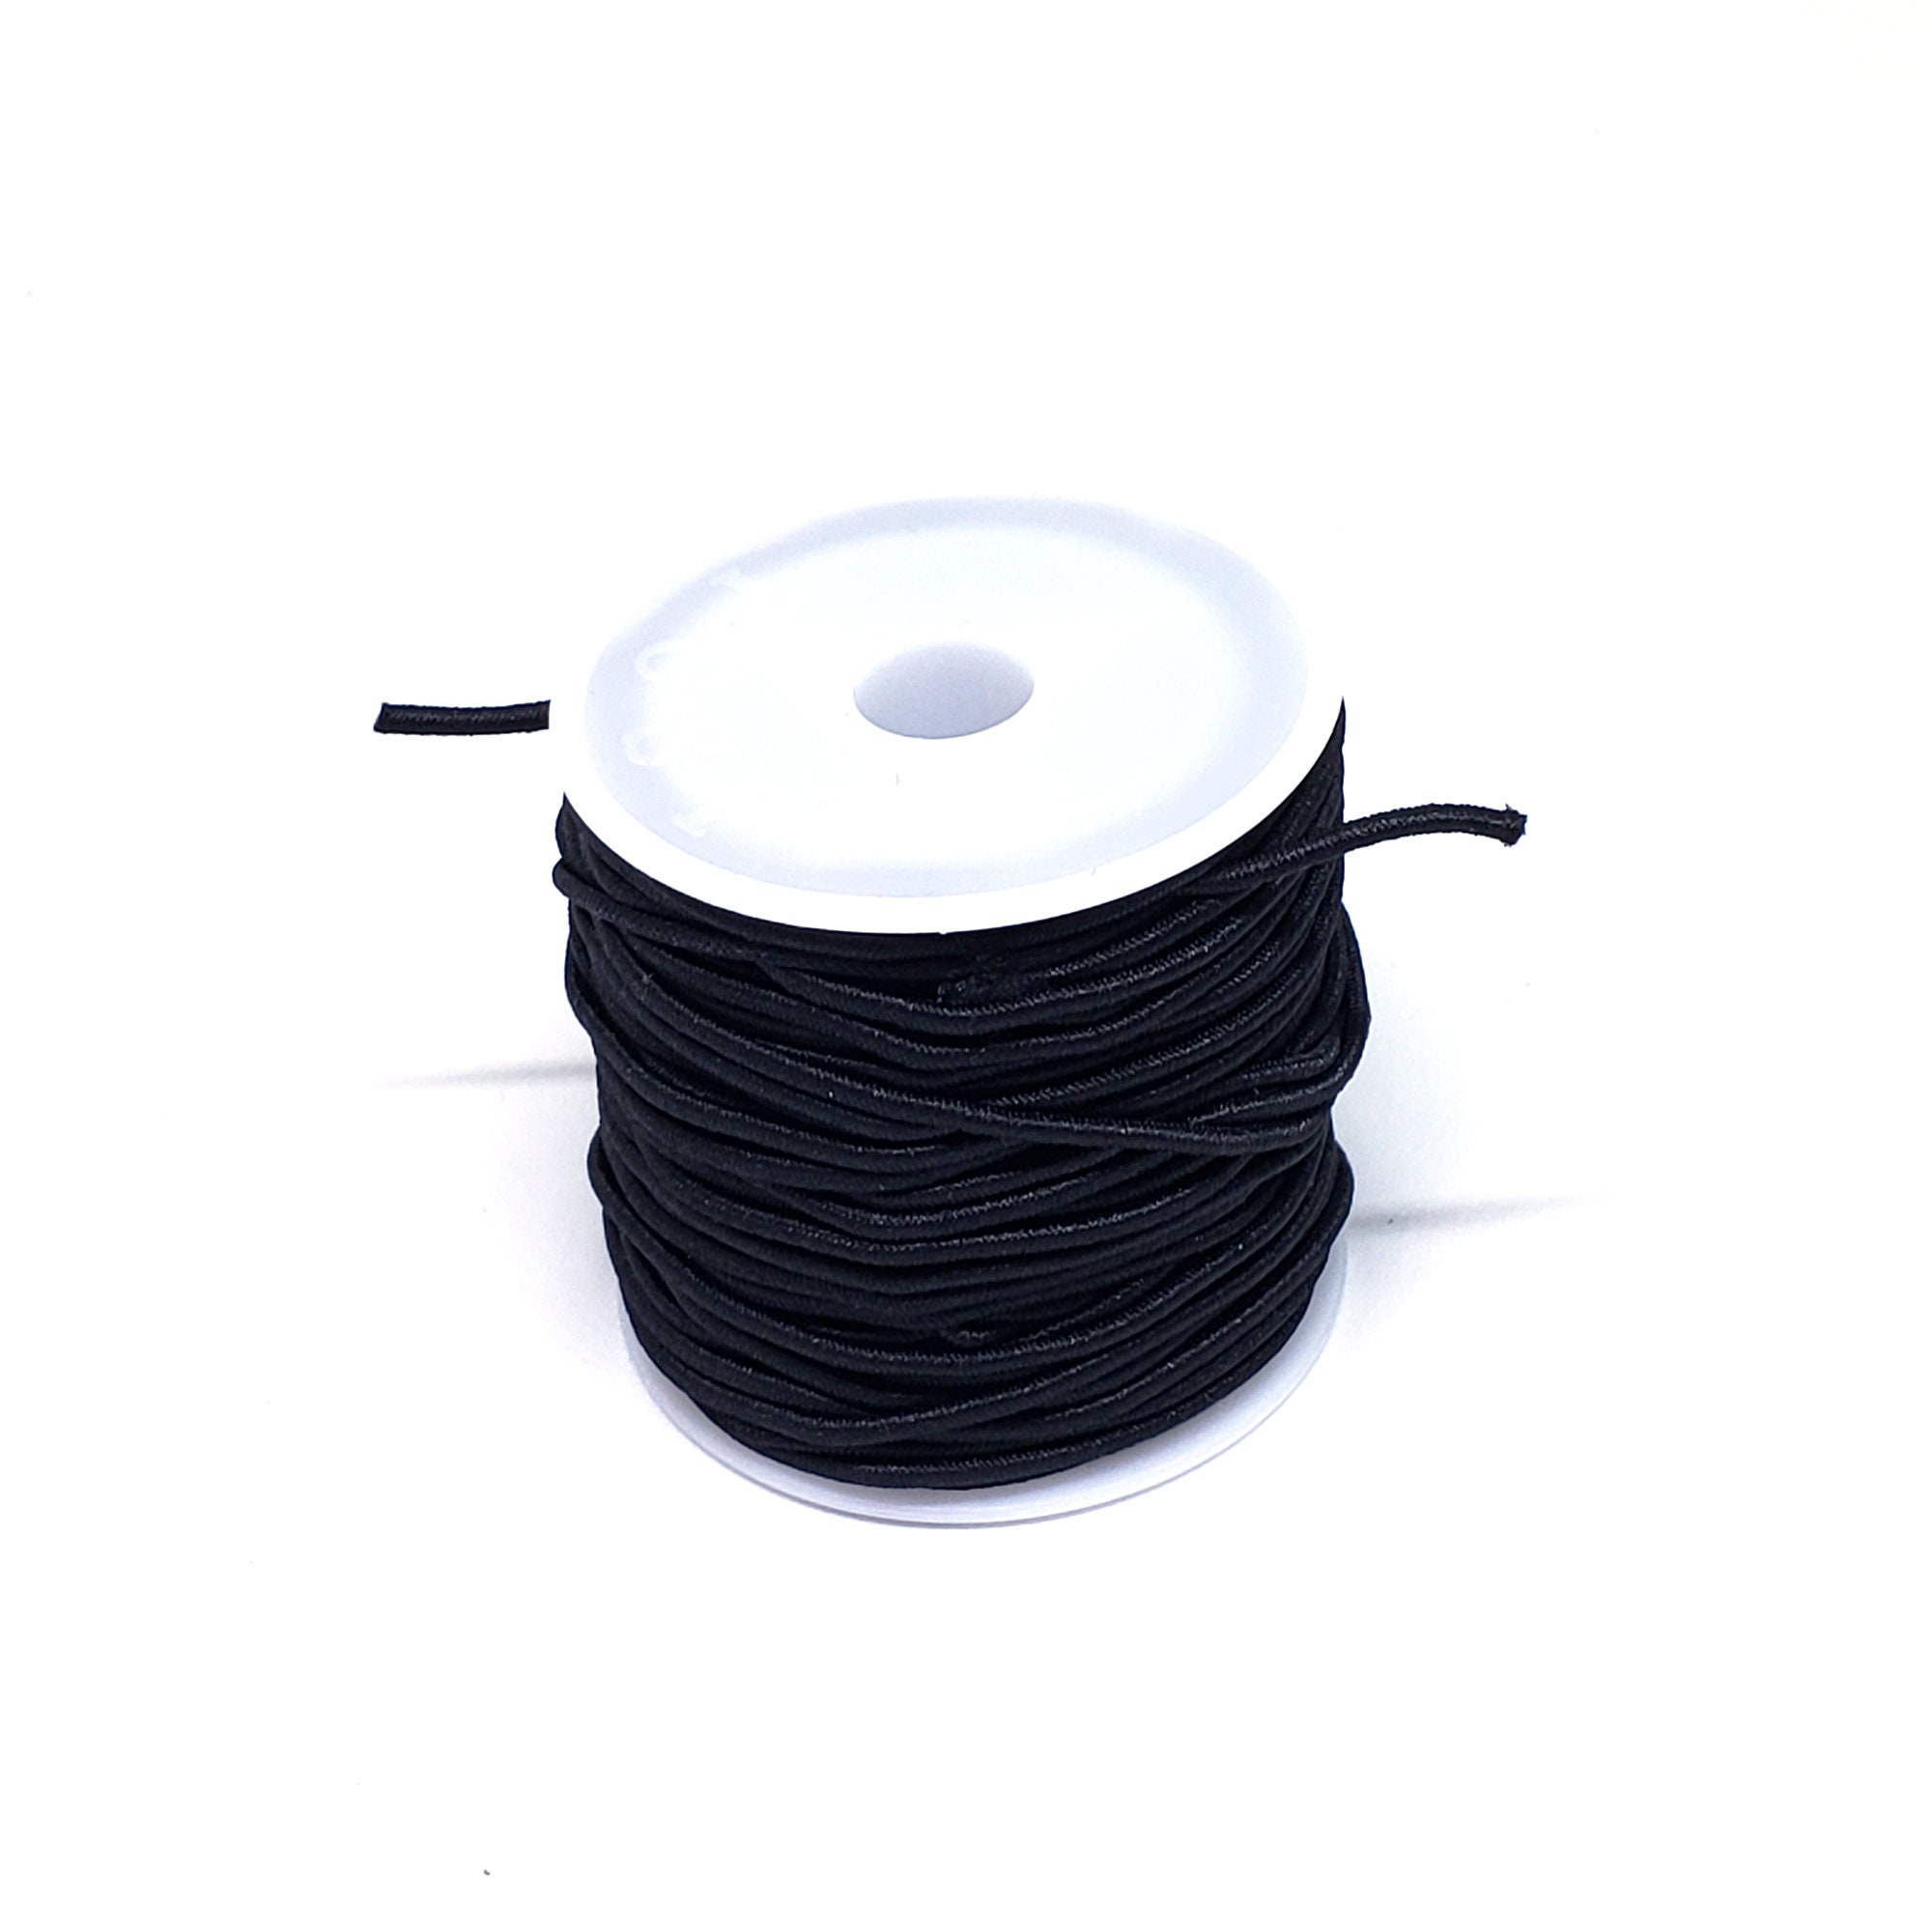 THICK Black Necklace Cord, 1.5 Mm Waxed Nylon Cord Necklace